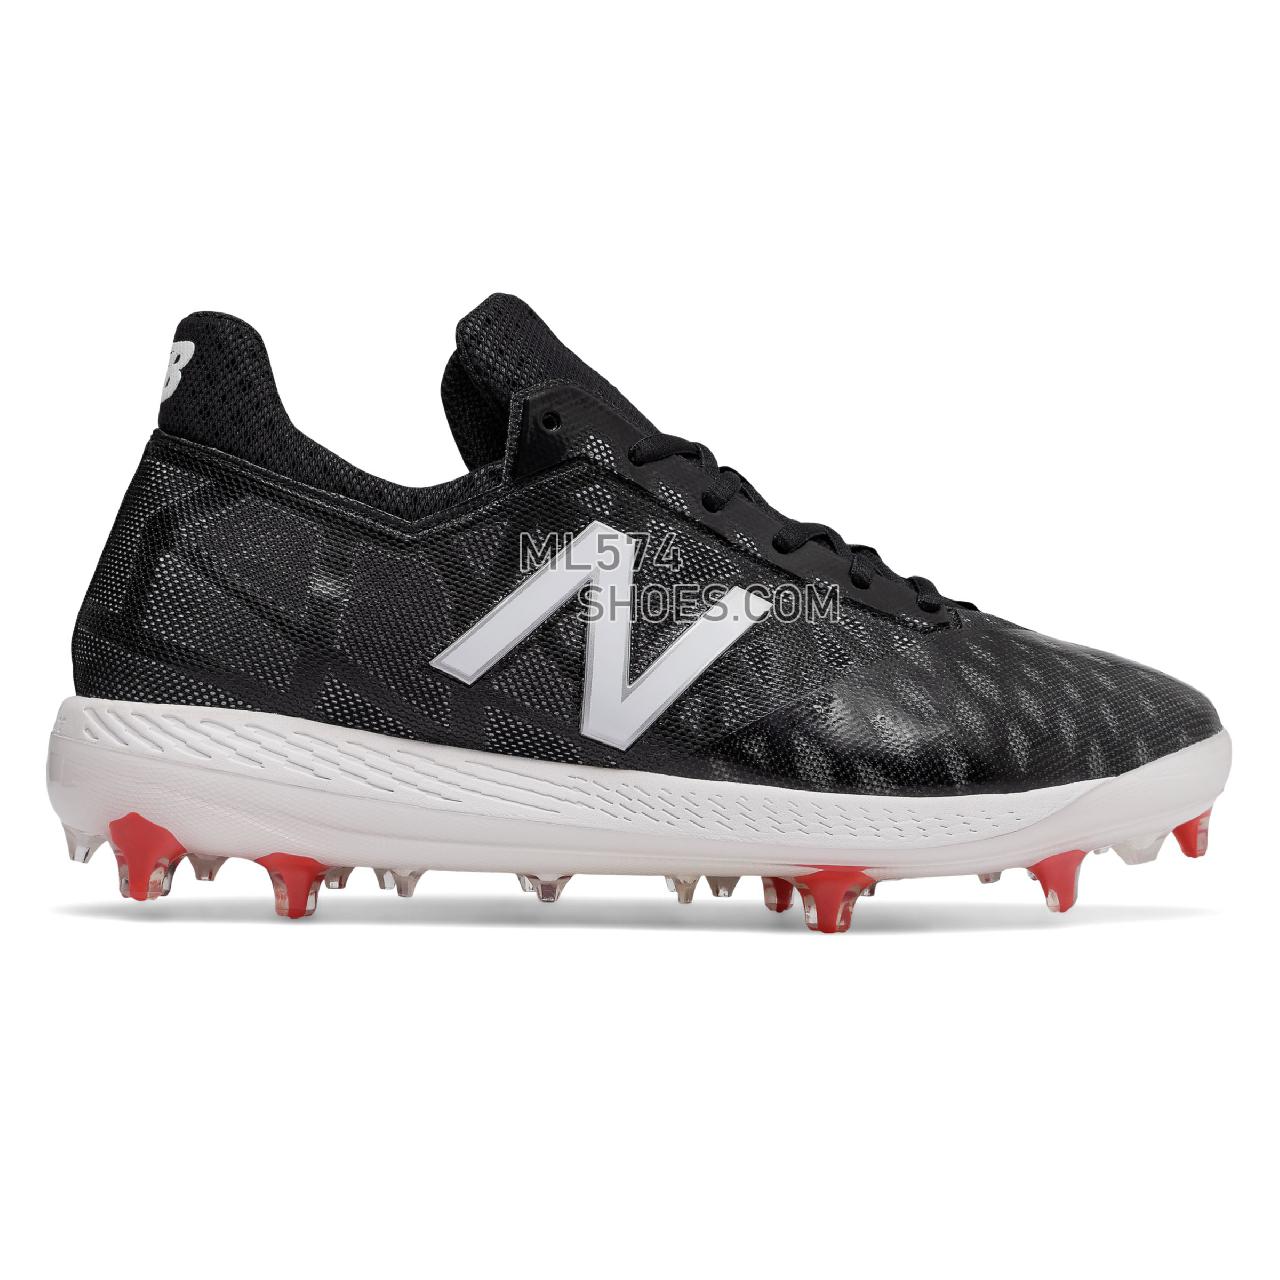 New Balance COMPv1 - Men's 1 - Baseball Black with White and Red - COMPBK1